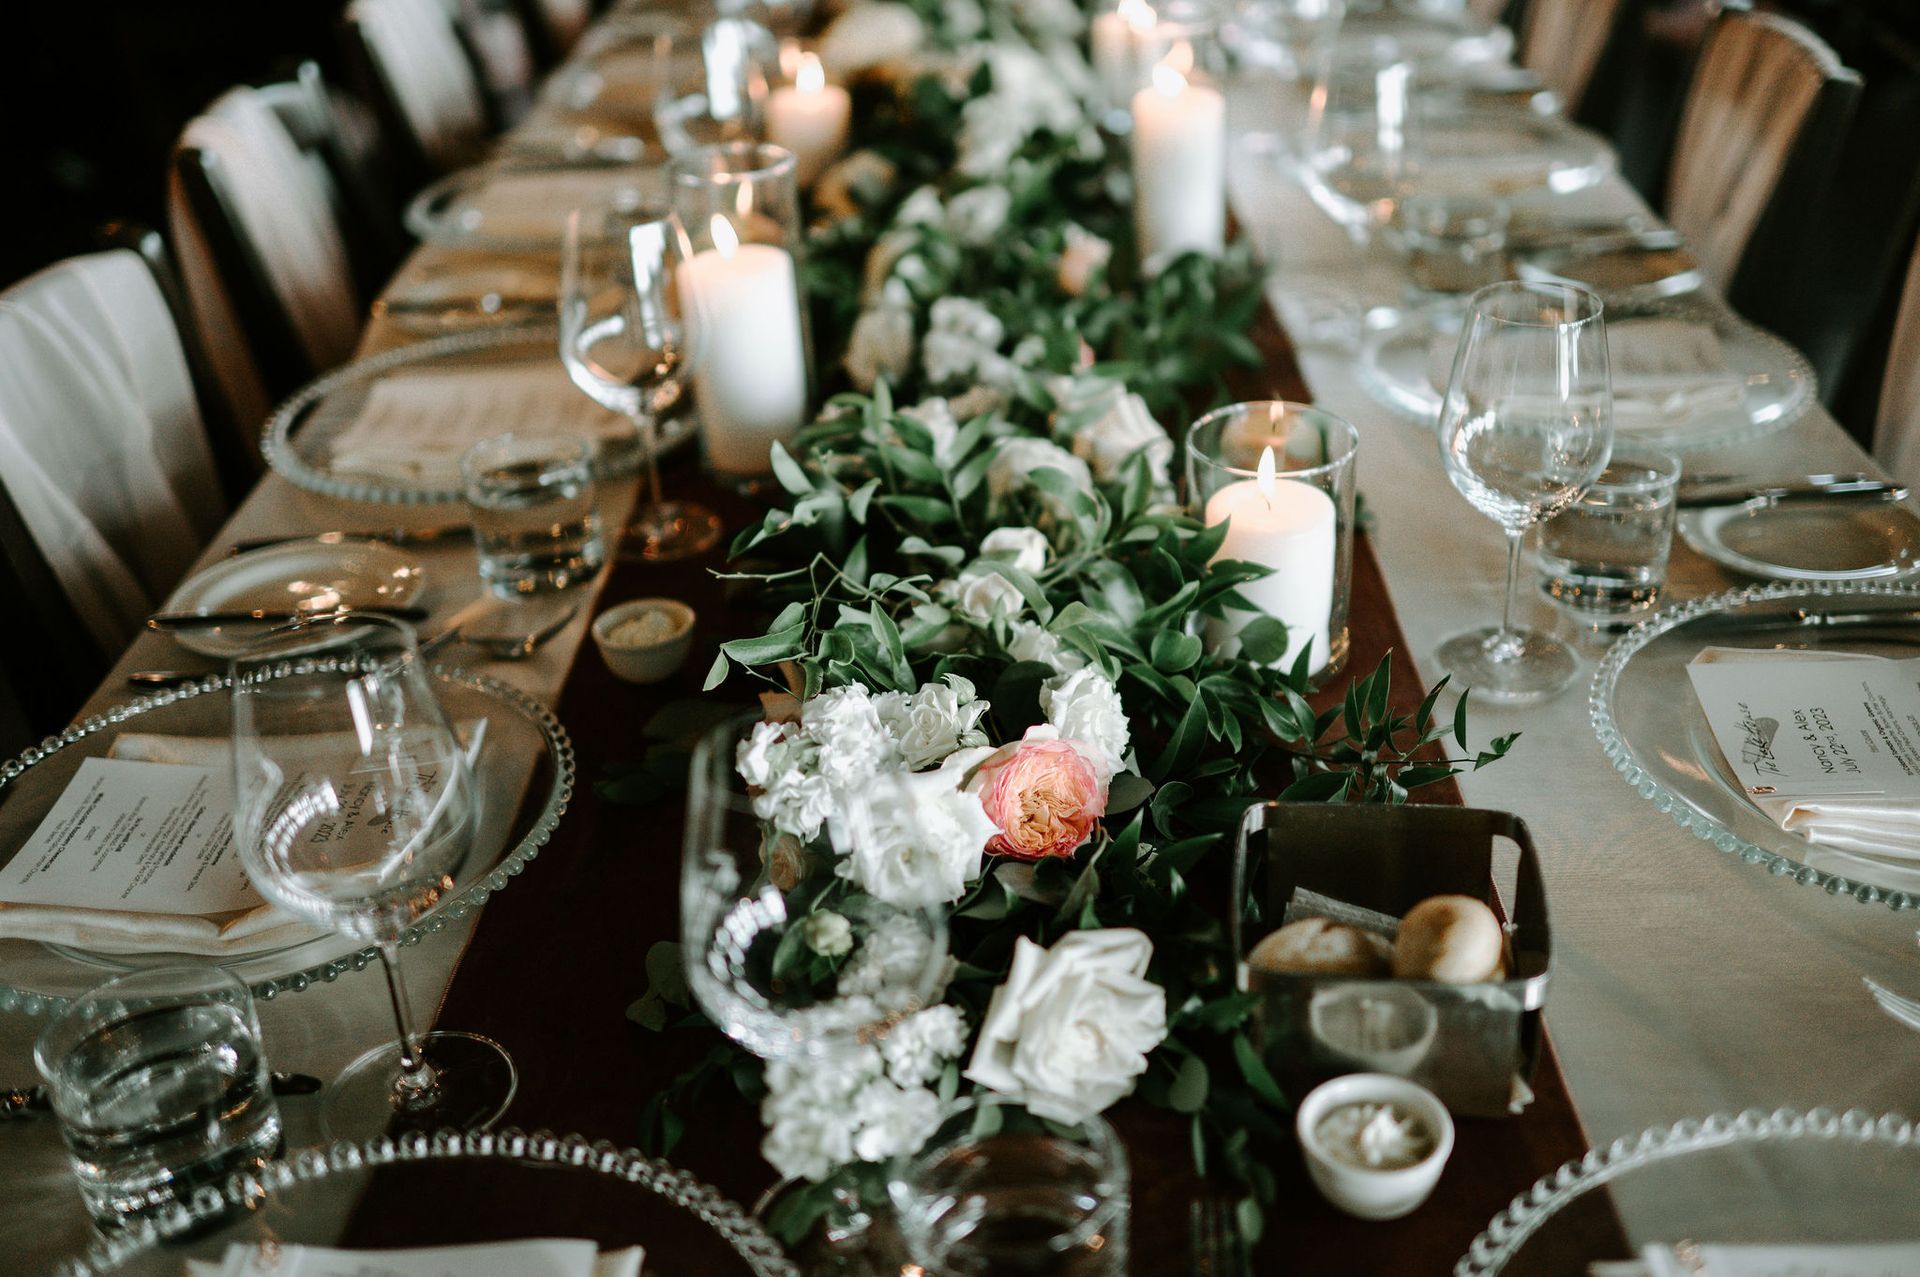 table dressed with glass chargers and flower running down the centre of the table, blush velvet table runner